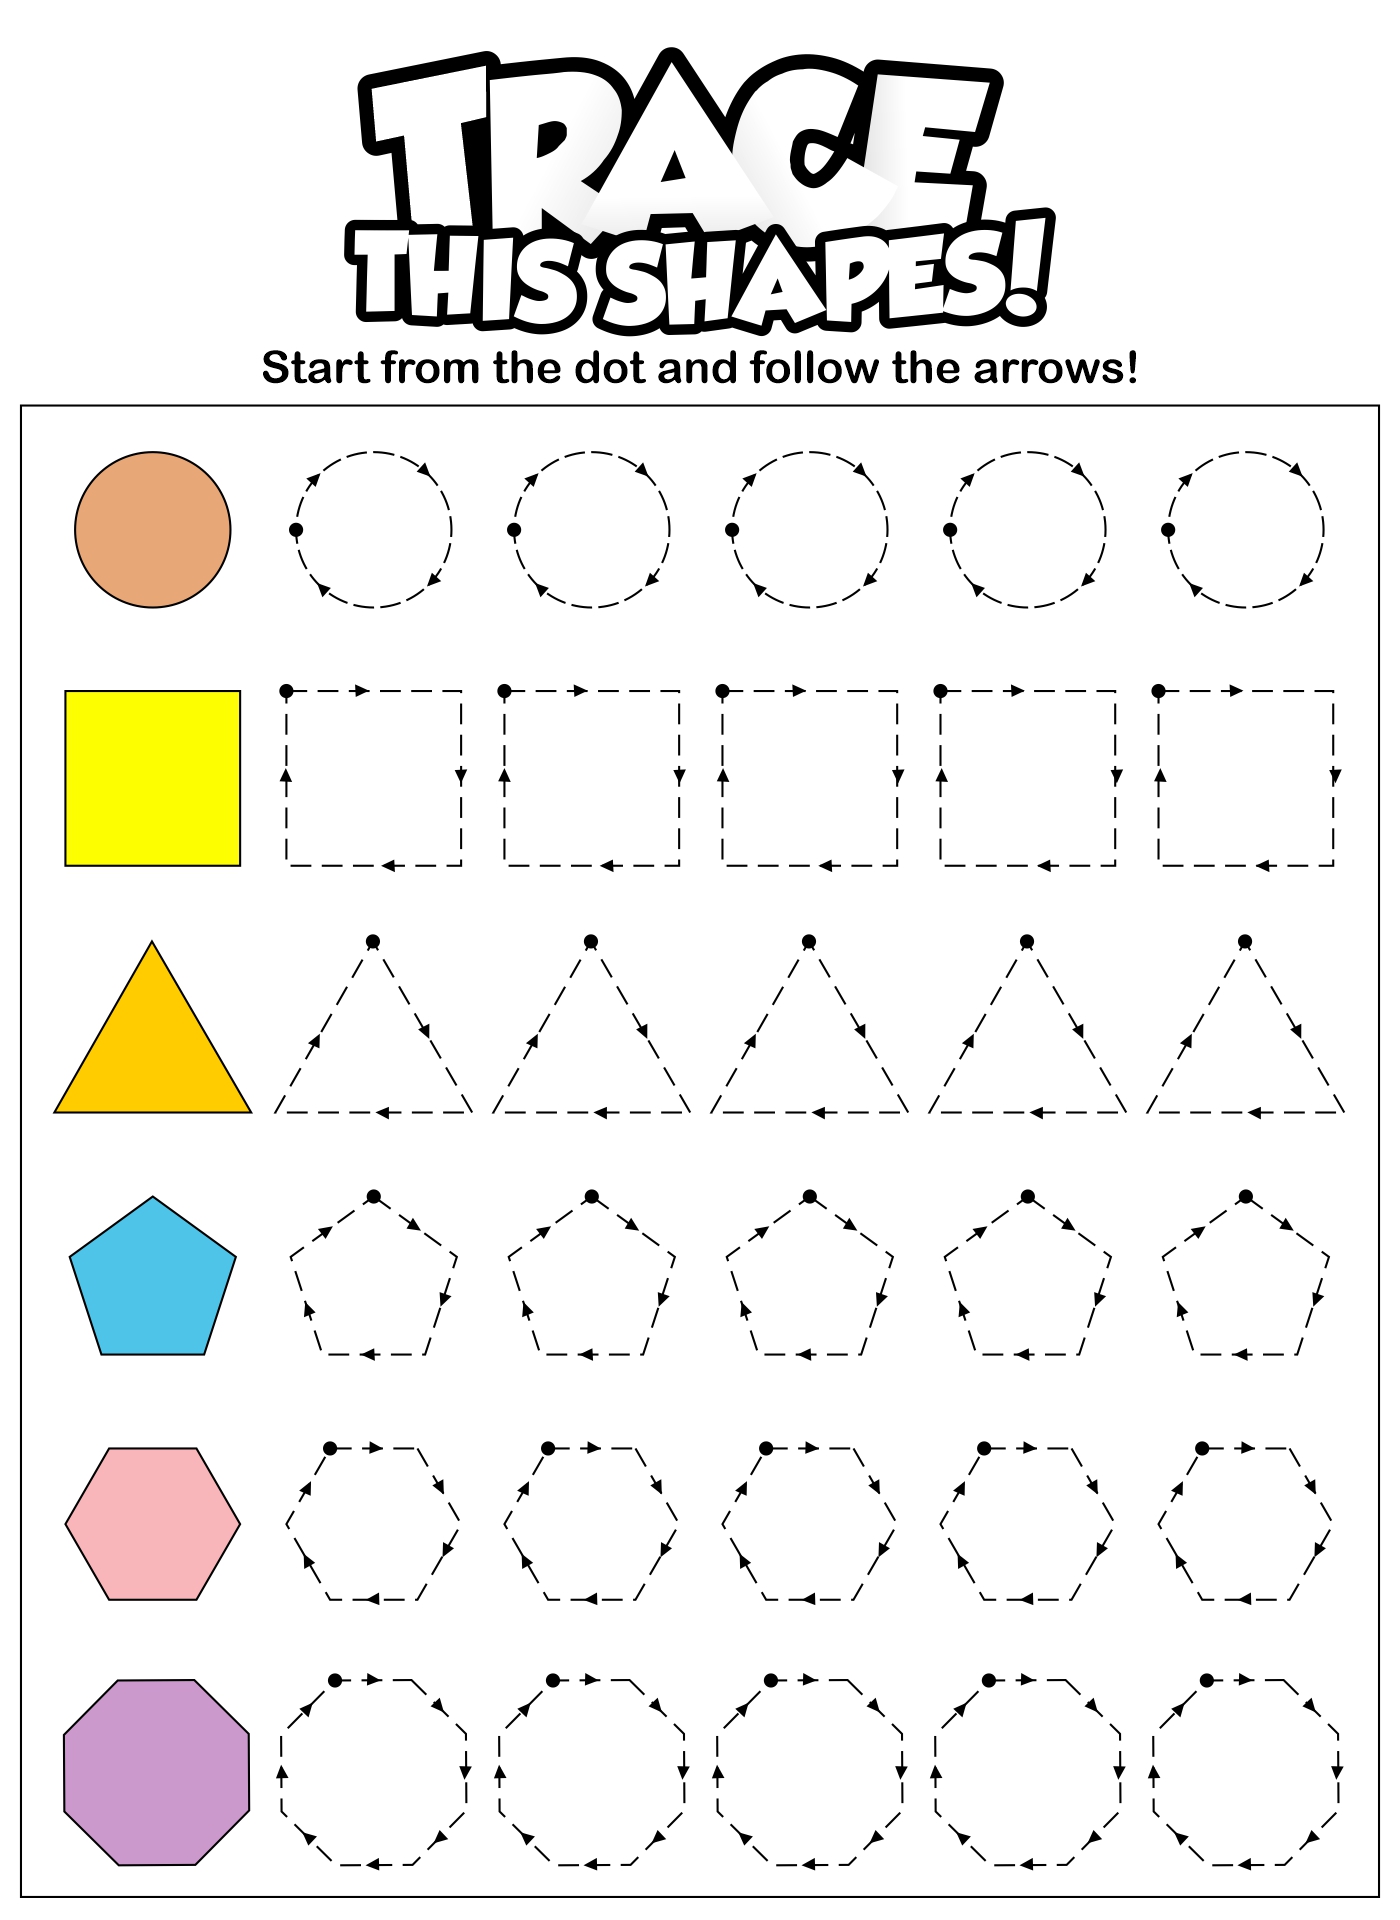 tracing-worksheets-for-2-year-olds